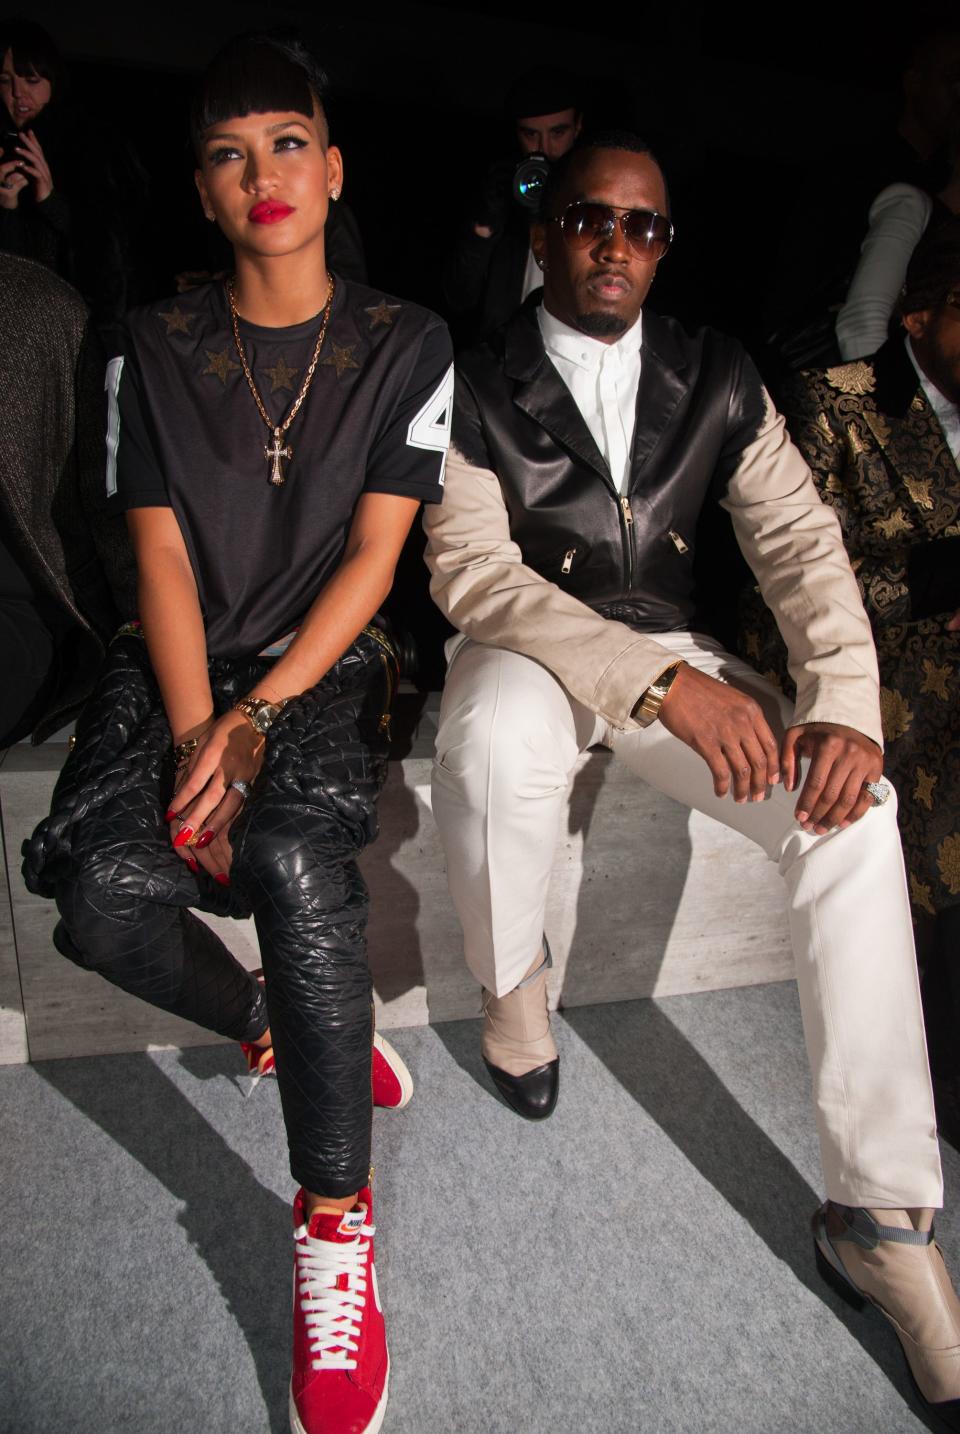 Cassie and Sean "Diddy" Combs attend the Kanye West Ready-To-Wear Fall/Winter 2012 show as part of Paris Fashion Week at Halle Freyssinet in Paris, France.